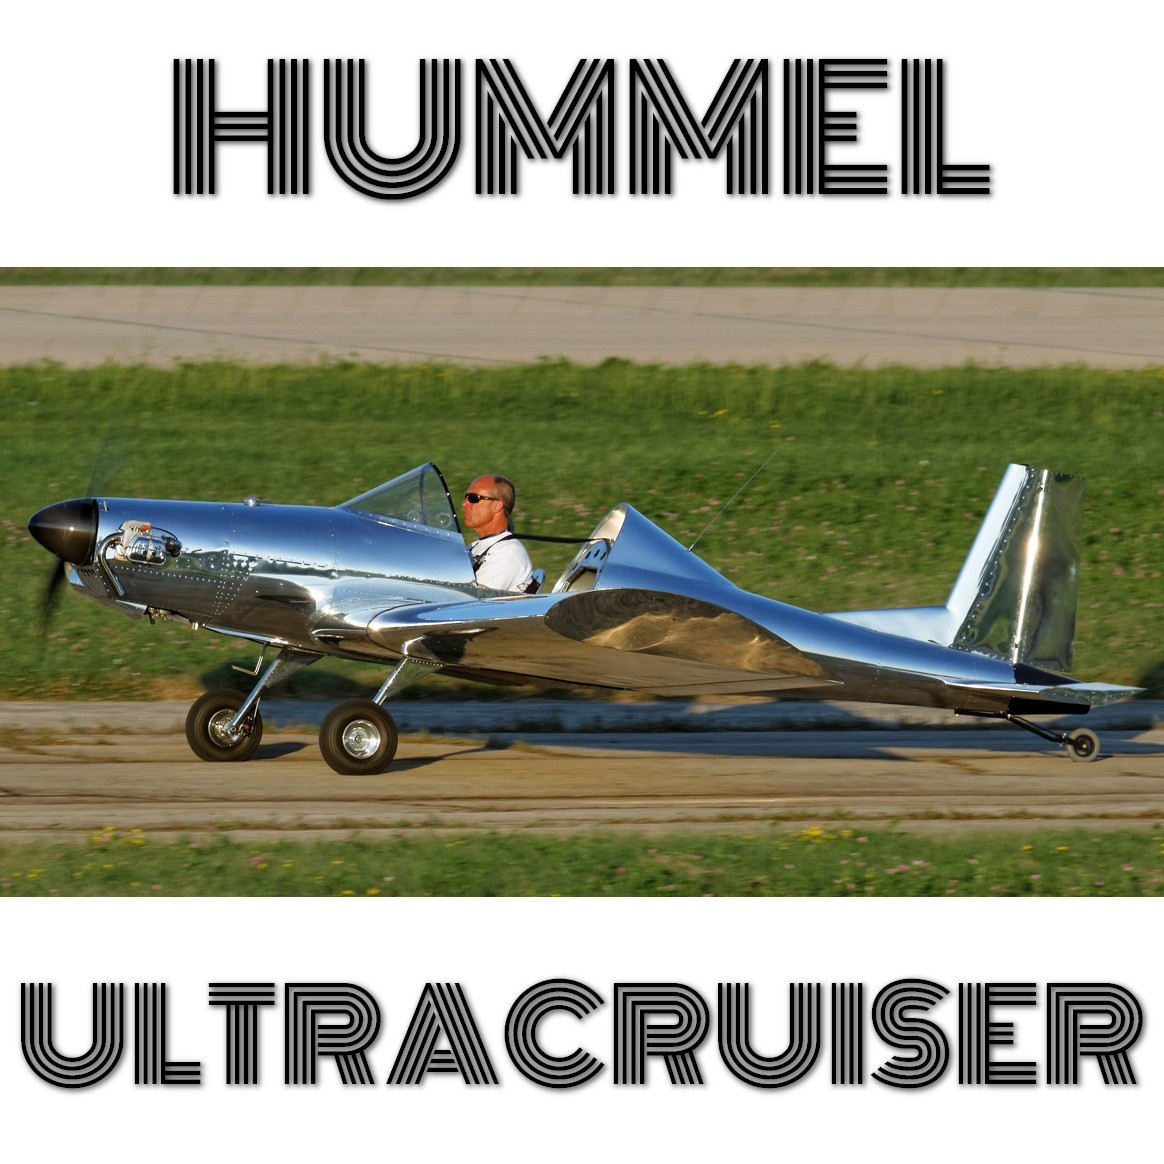 HUMMEL ULTRACRUISER - PLANS AND INFORMATION PACK HOMEBUILD WV ONE SEAT SIMPLE & CHEAP BUILD FULL PART103 ULTRALIGHT | https://buildandfly.shop